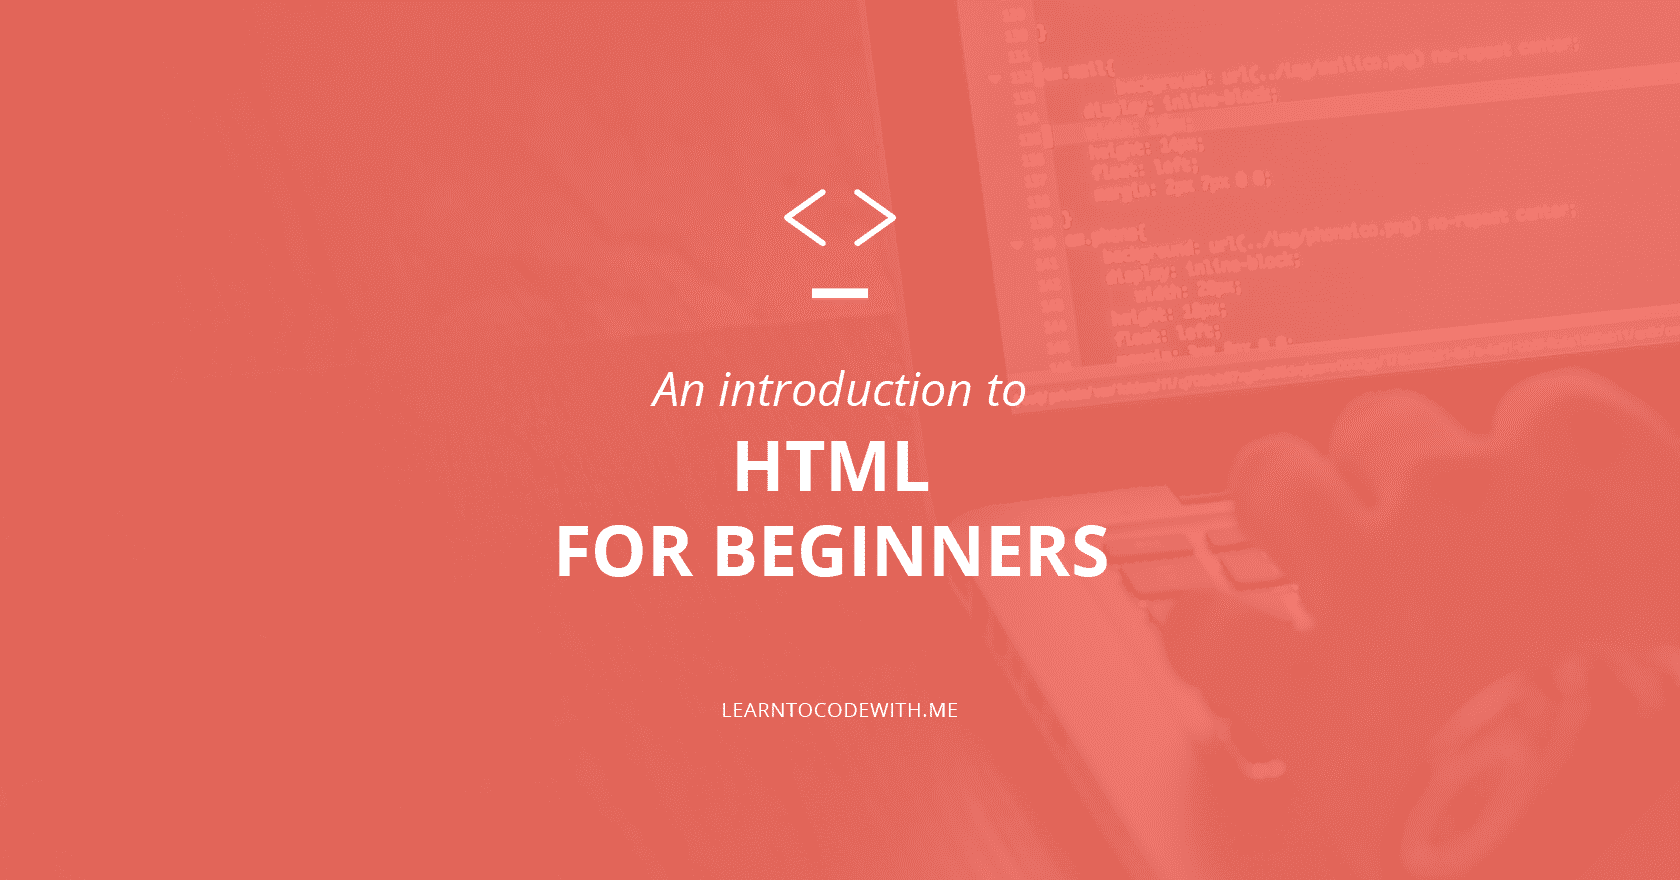 An introduction to HTML for beginners